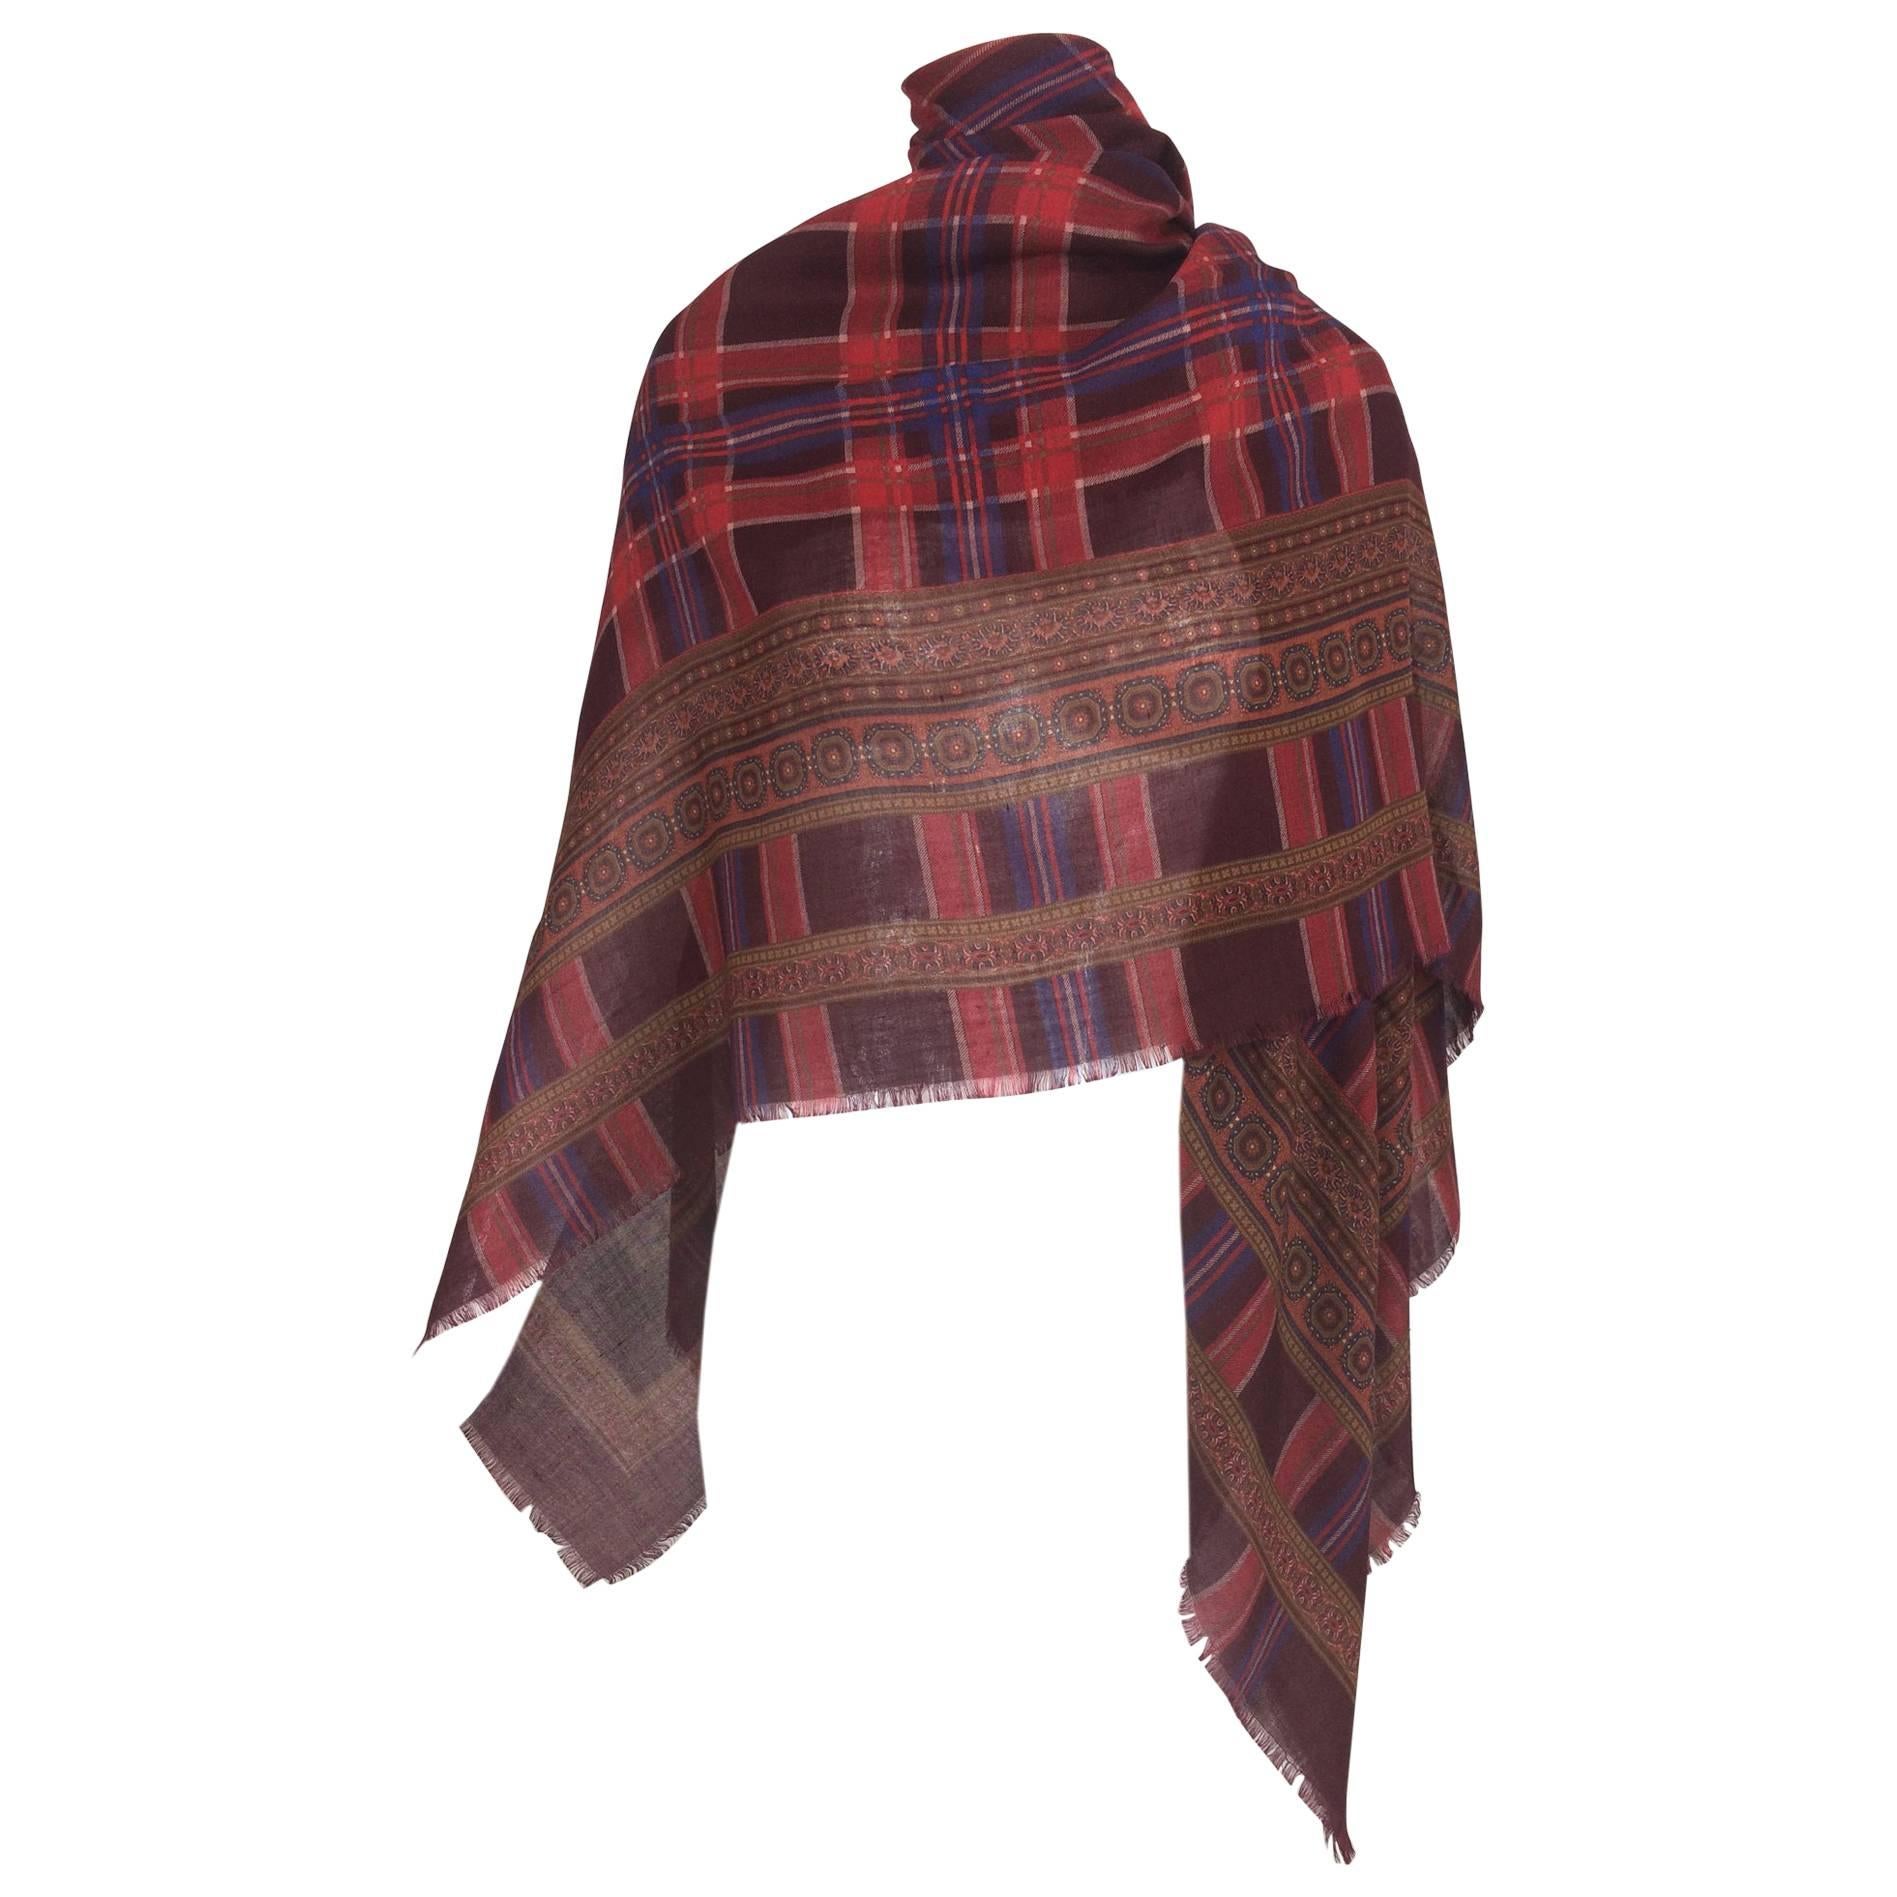 Yves St Laurent cashmere and silk mix plaid and print large shawl scarf 1990s